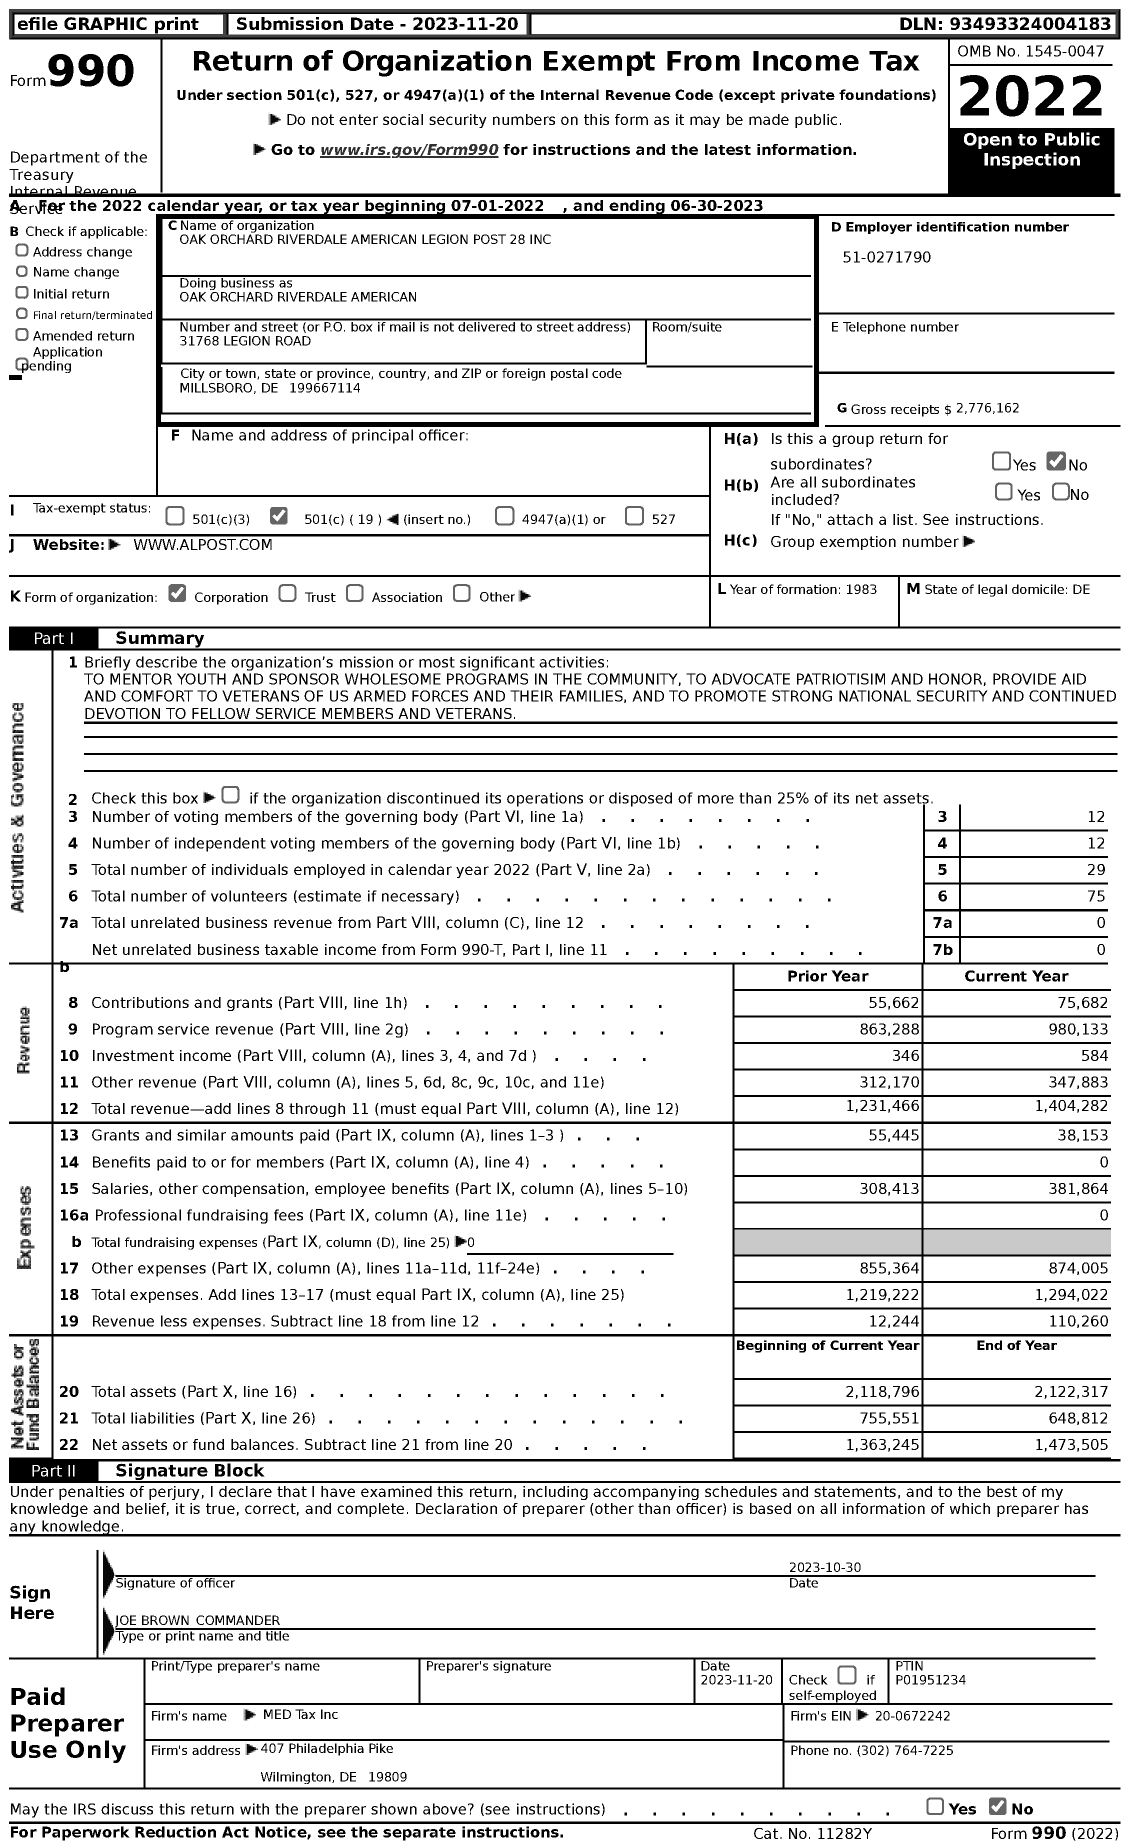 Image of first page of 2022 Form 990 for American Legion - Oak Orchard Riverdale American